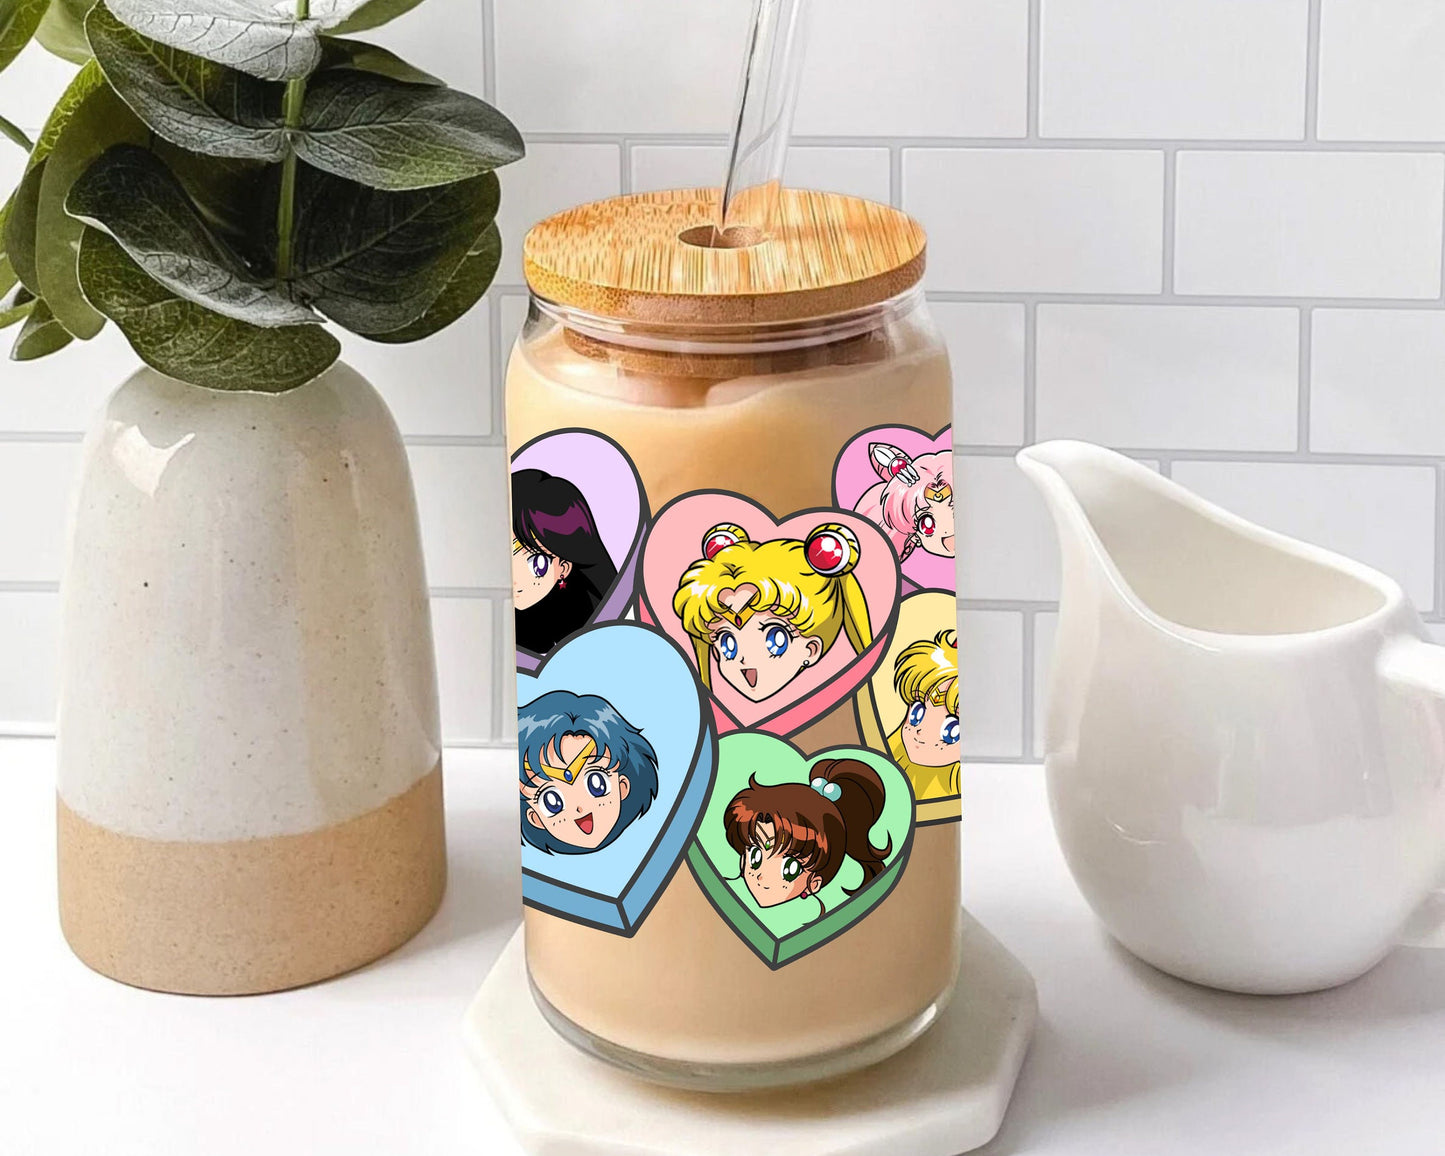 Sailor Moon Anime Cup Decal, Ready to Use Glass Cup Decal